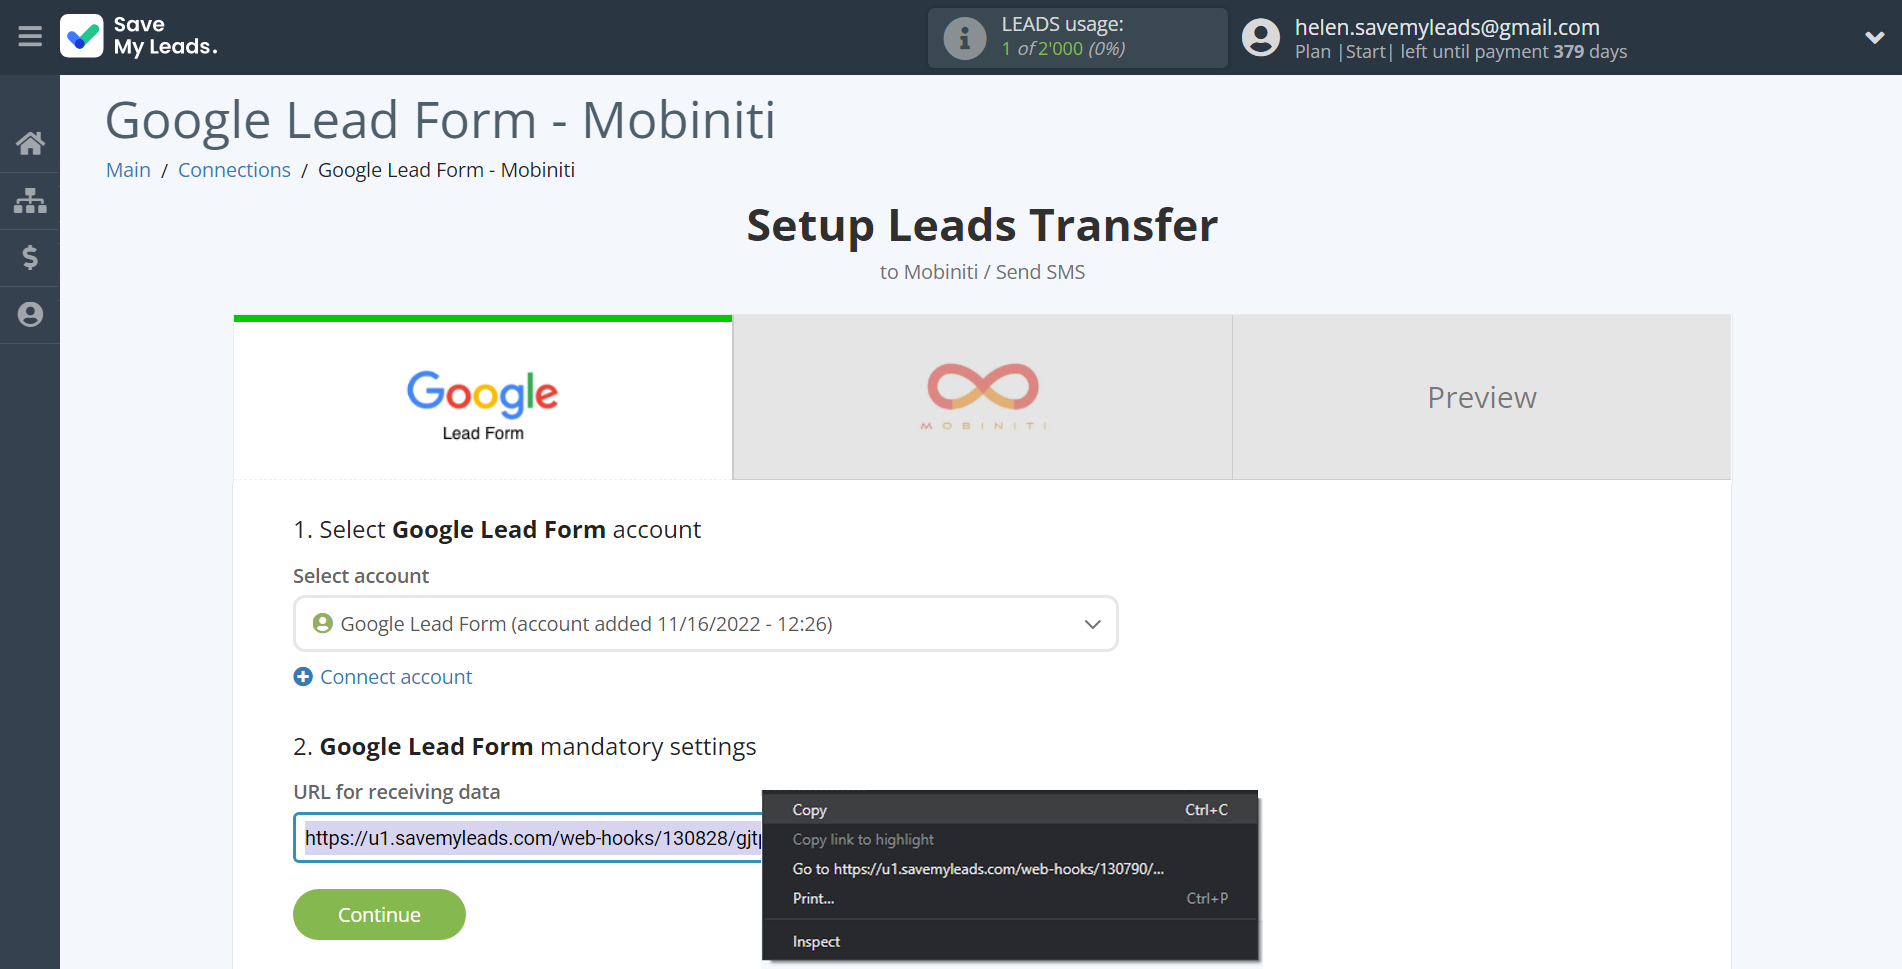 How to Connect Google Lead Form with Mobiniti | Data Source account connection